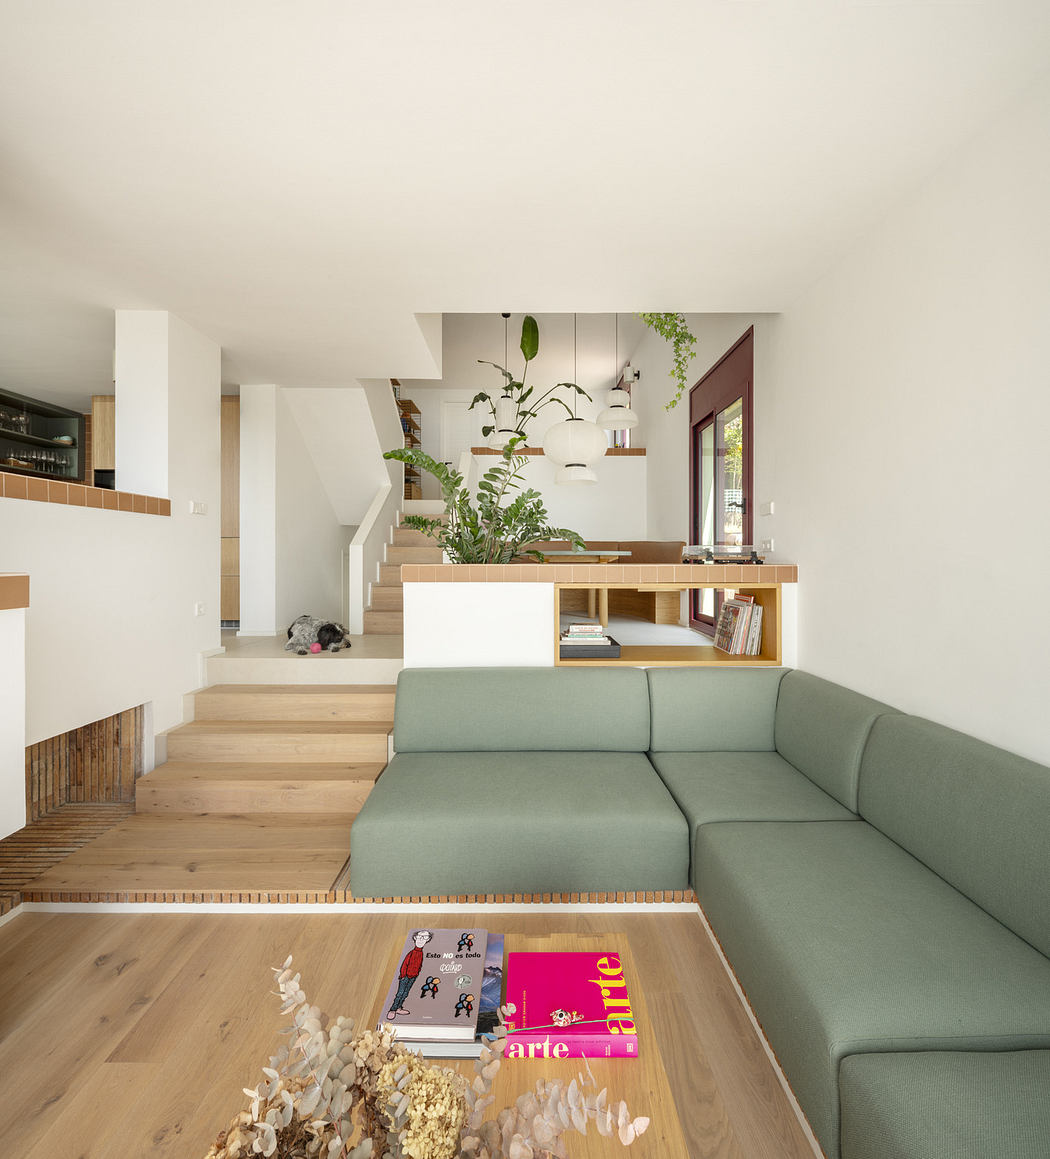 August Project: Barcelona’s Triplex Reimagined by Nook Architects - 1